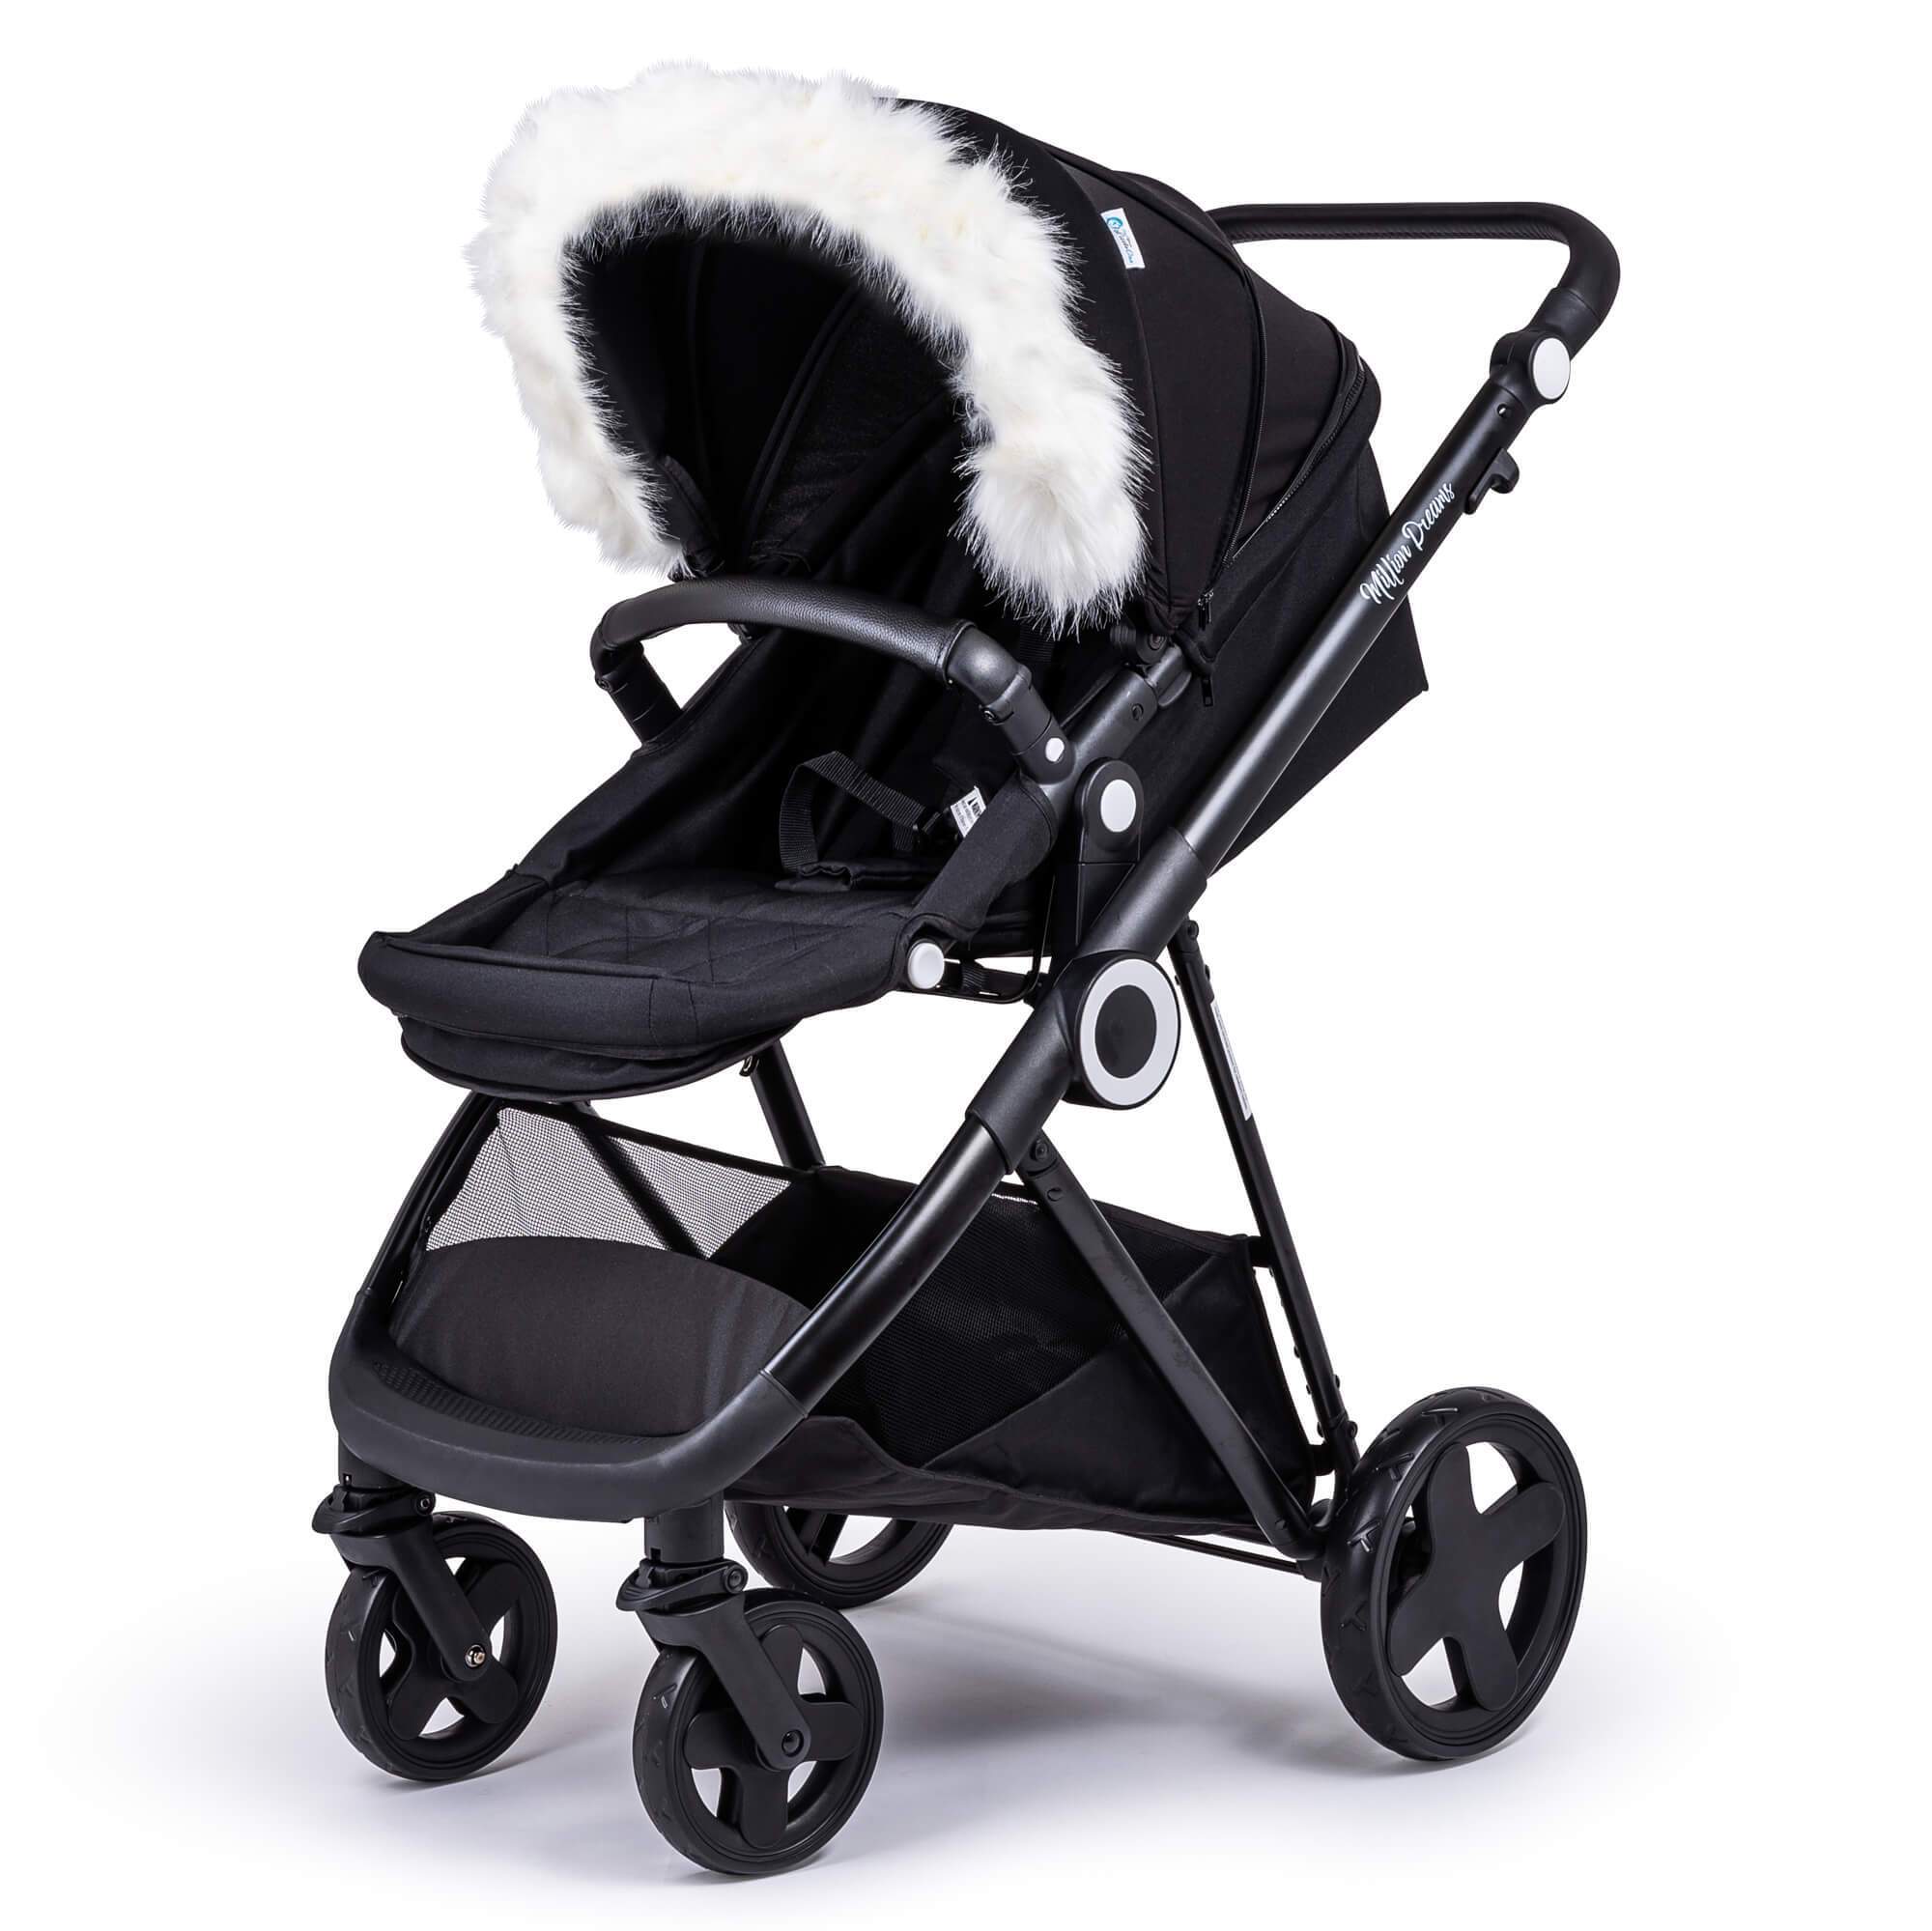 Pram Fur Hood Trim Attachment for Pushchair Compatible with Bumbleride - White / Fits All Models | For Your Little One